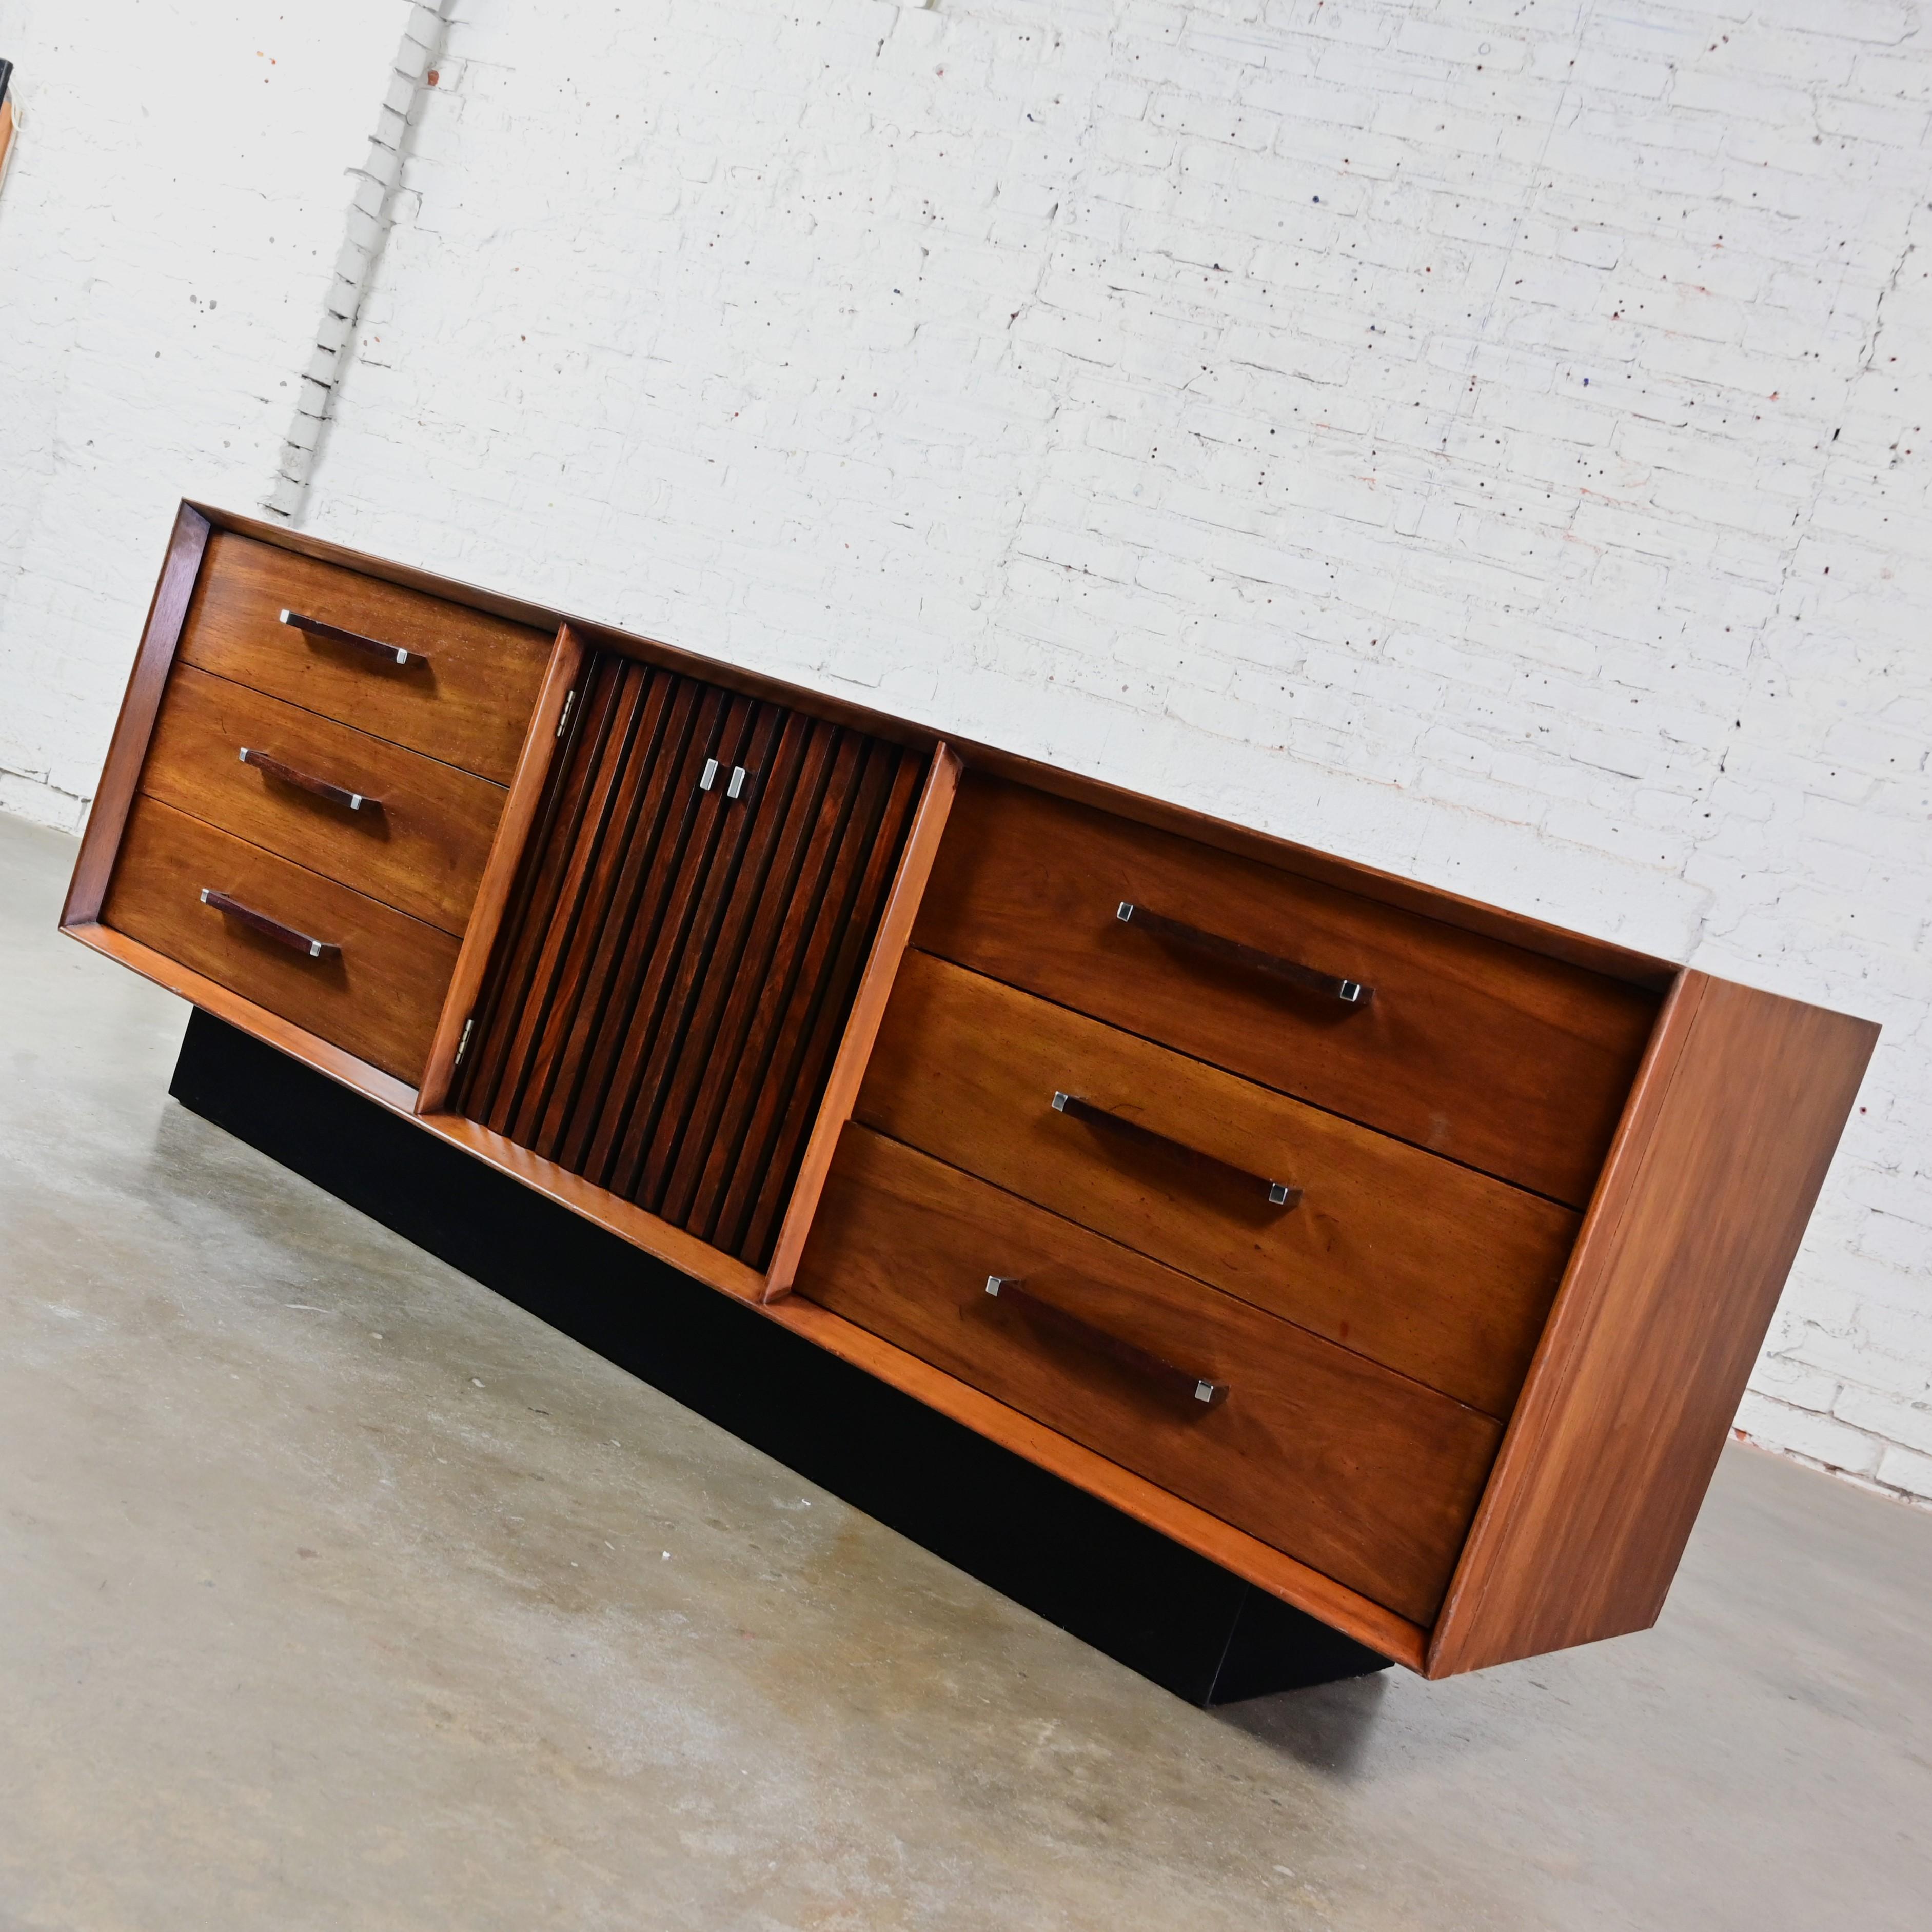 Spectacular vintage Mid-Century Modern dresser, credenza, buffet, or sideboard Lane Furniture Tower Suite Collection comprised of walnut, rosewood and chrome details, hardware, & door fronts, 9 drawers, and a black painted plinth base. Beautiful